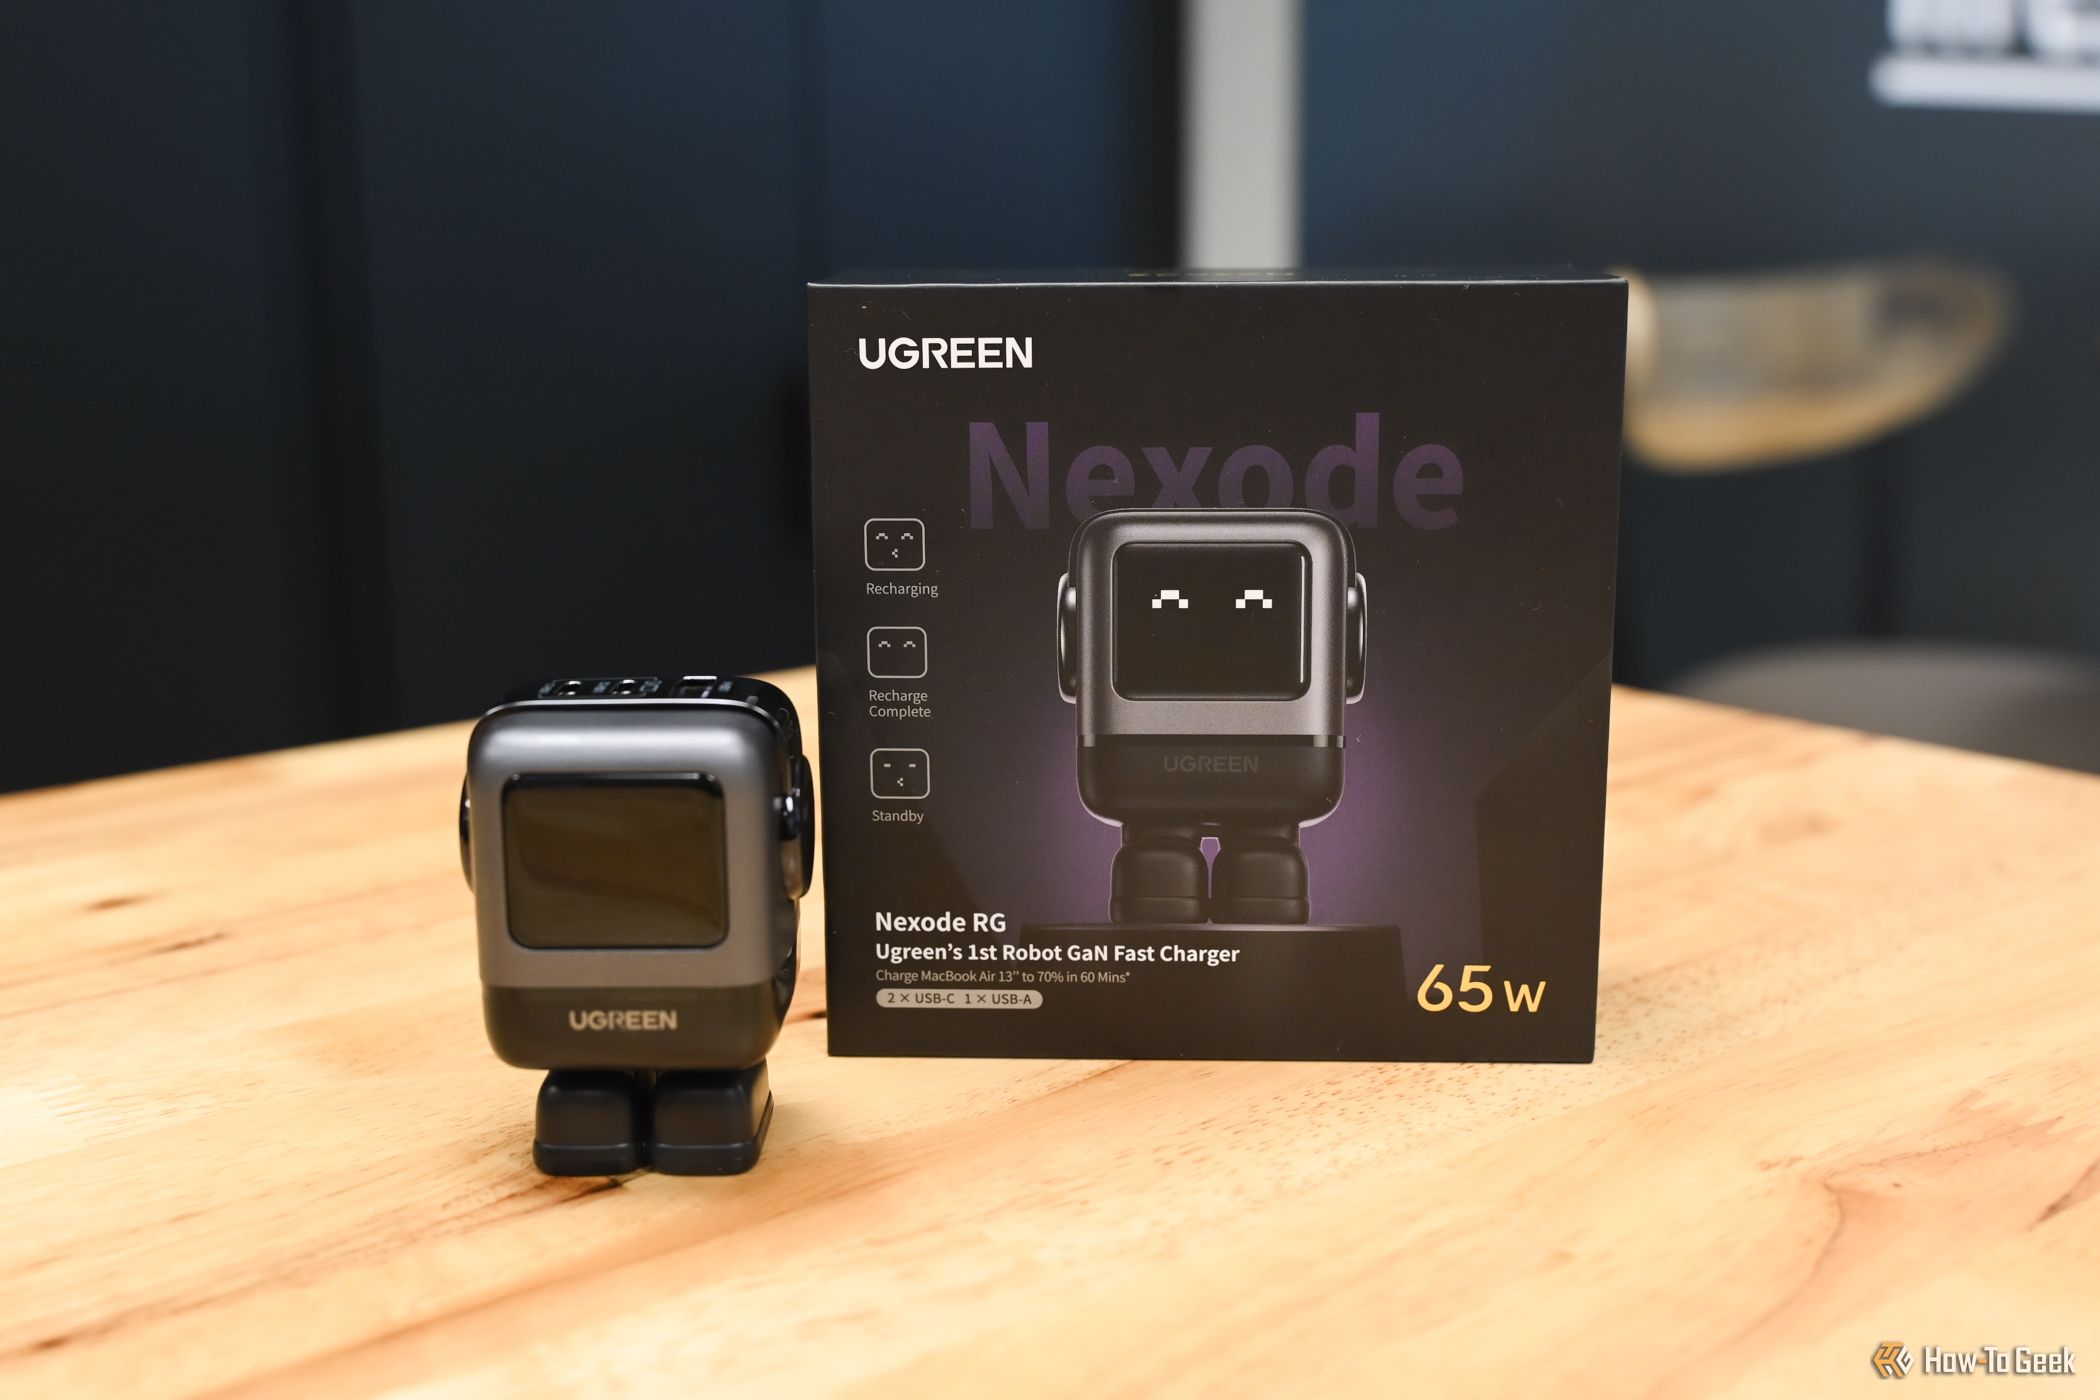 Ugreen Nexode 65W Robot Charger sitting next to packaging